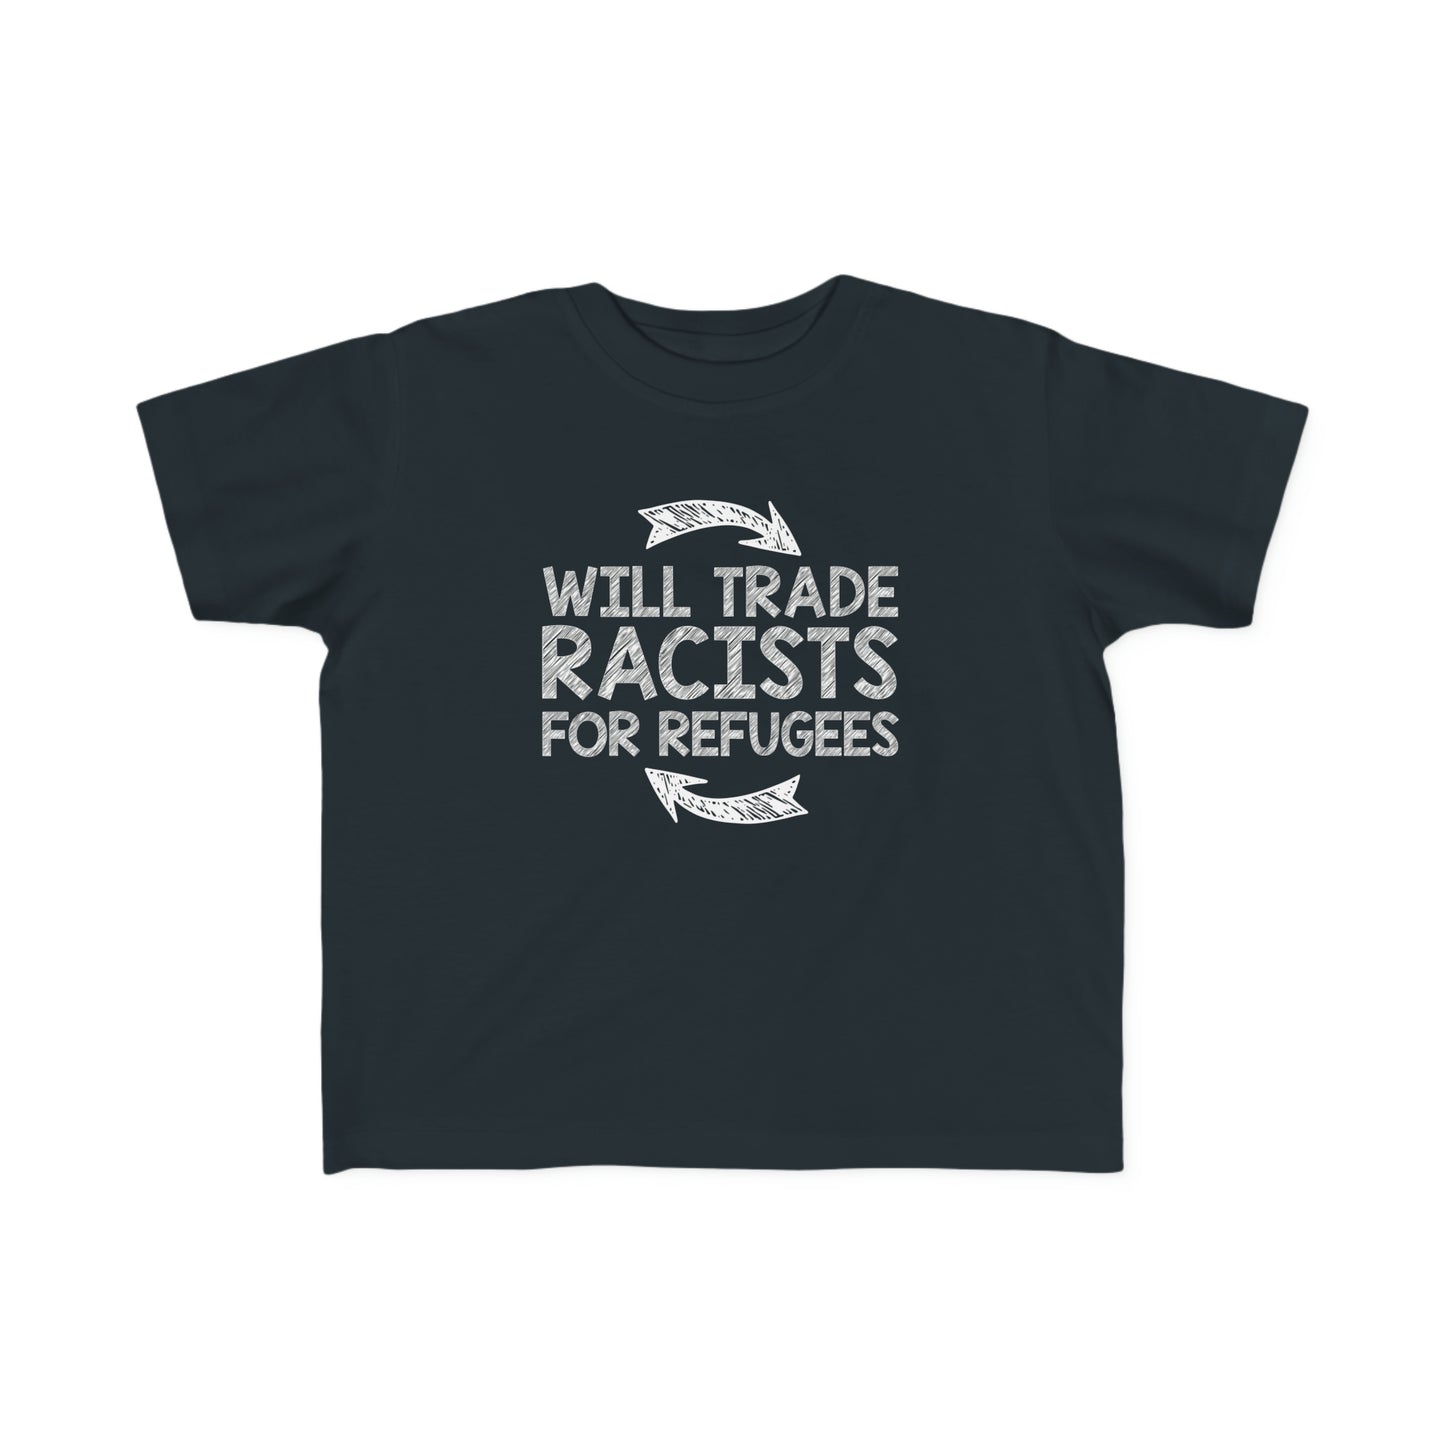 “Will Trade Racists for Refugees” Toddler's Tee